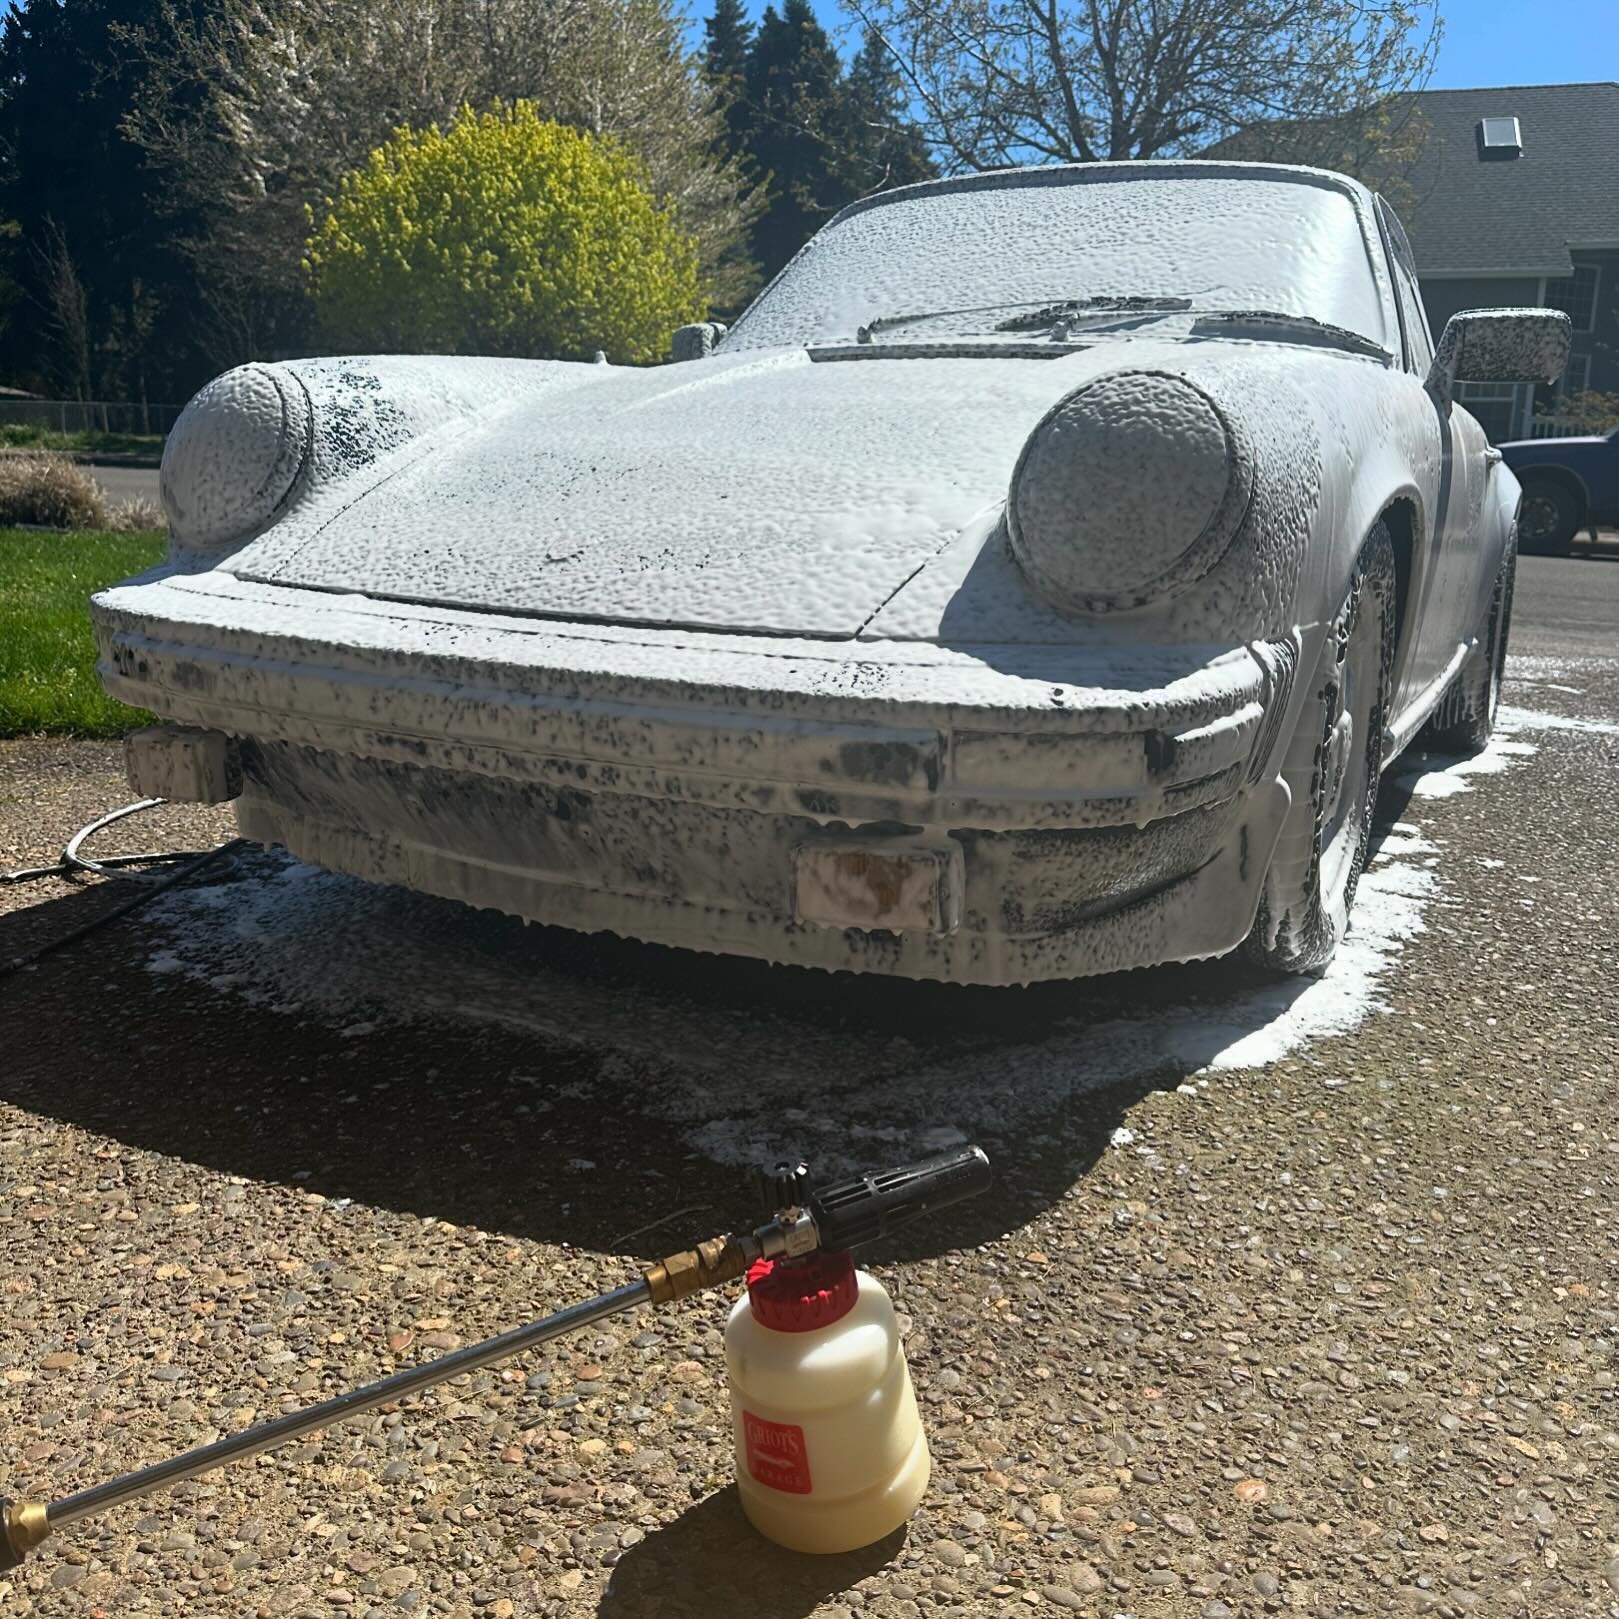 @griotsgarage keeping the 911 clean in between track days and prerunning for our rally in June. Each rally registration includes a care kit from Griot&rsquo;s Garage!